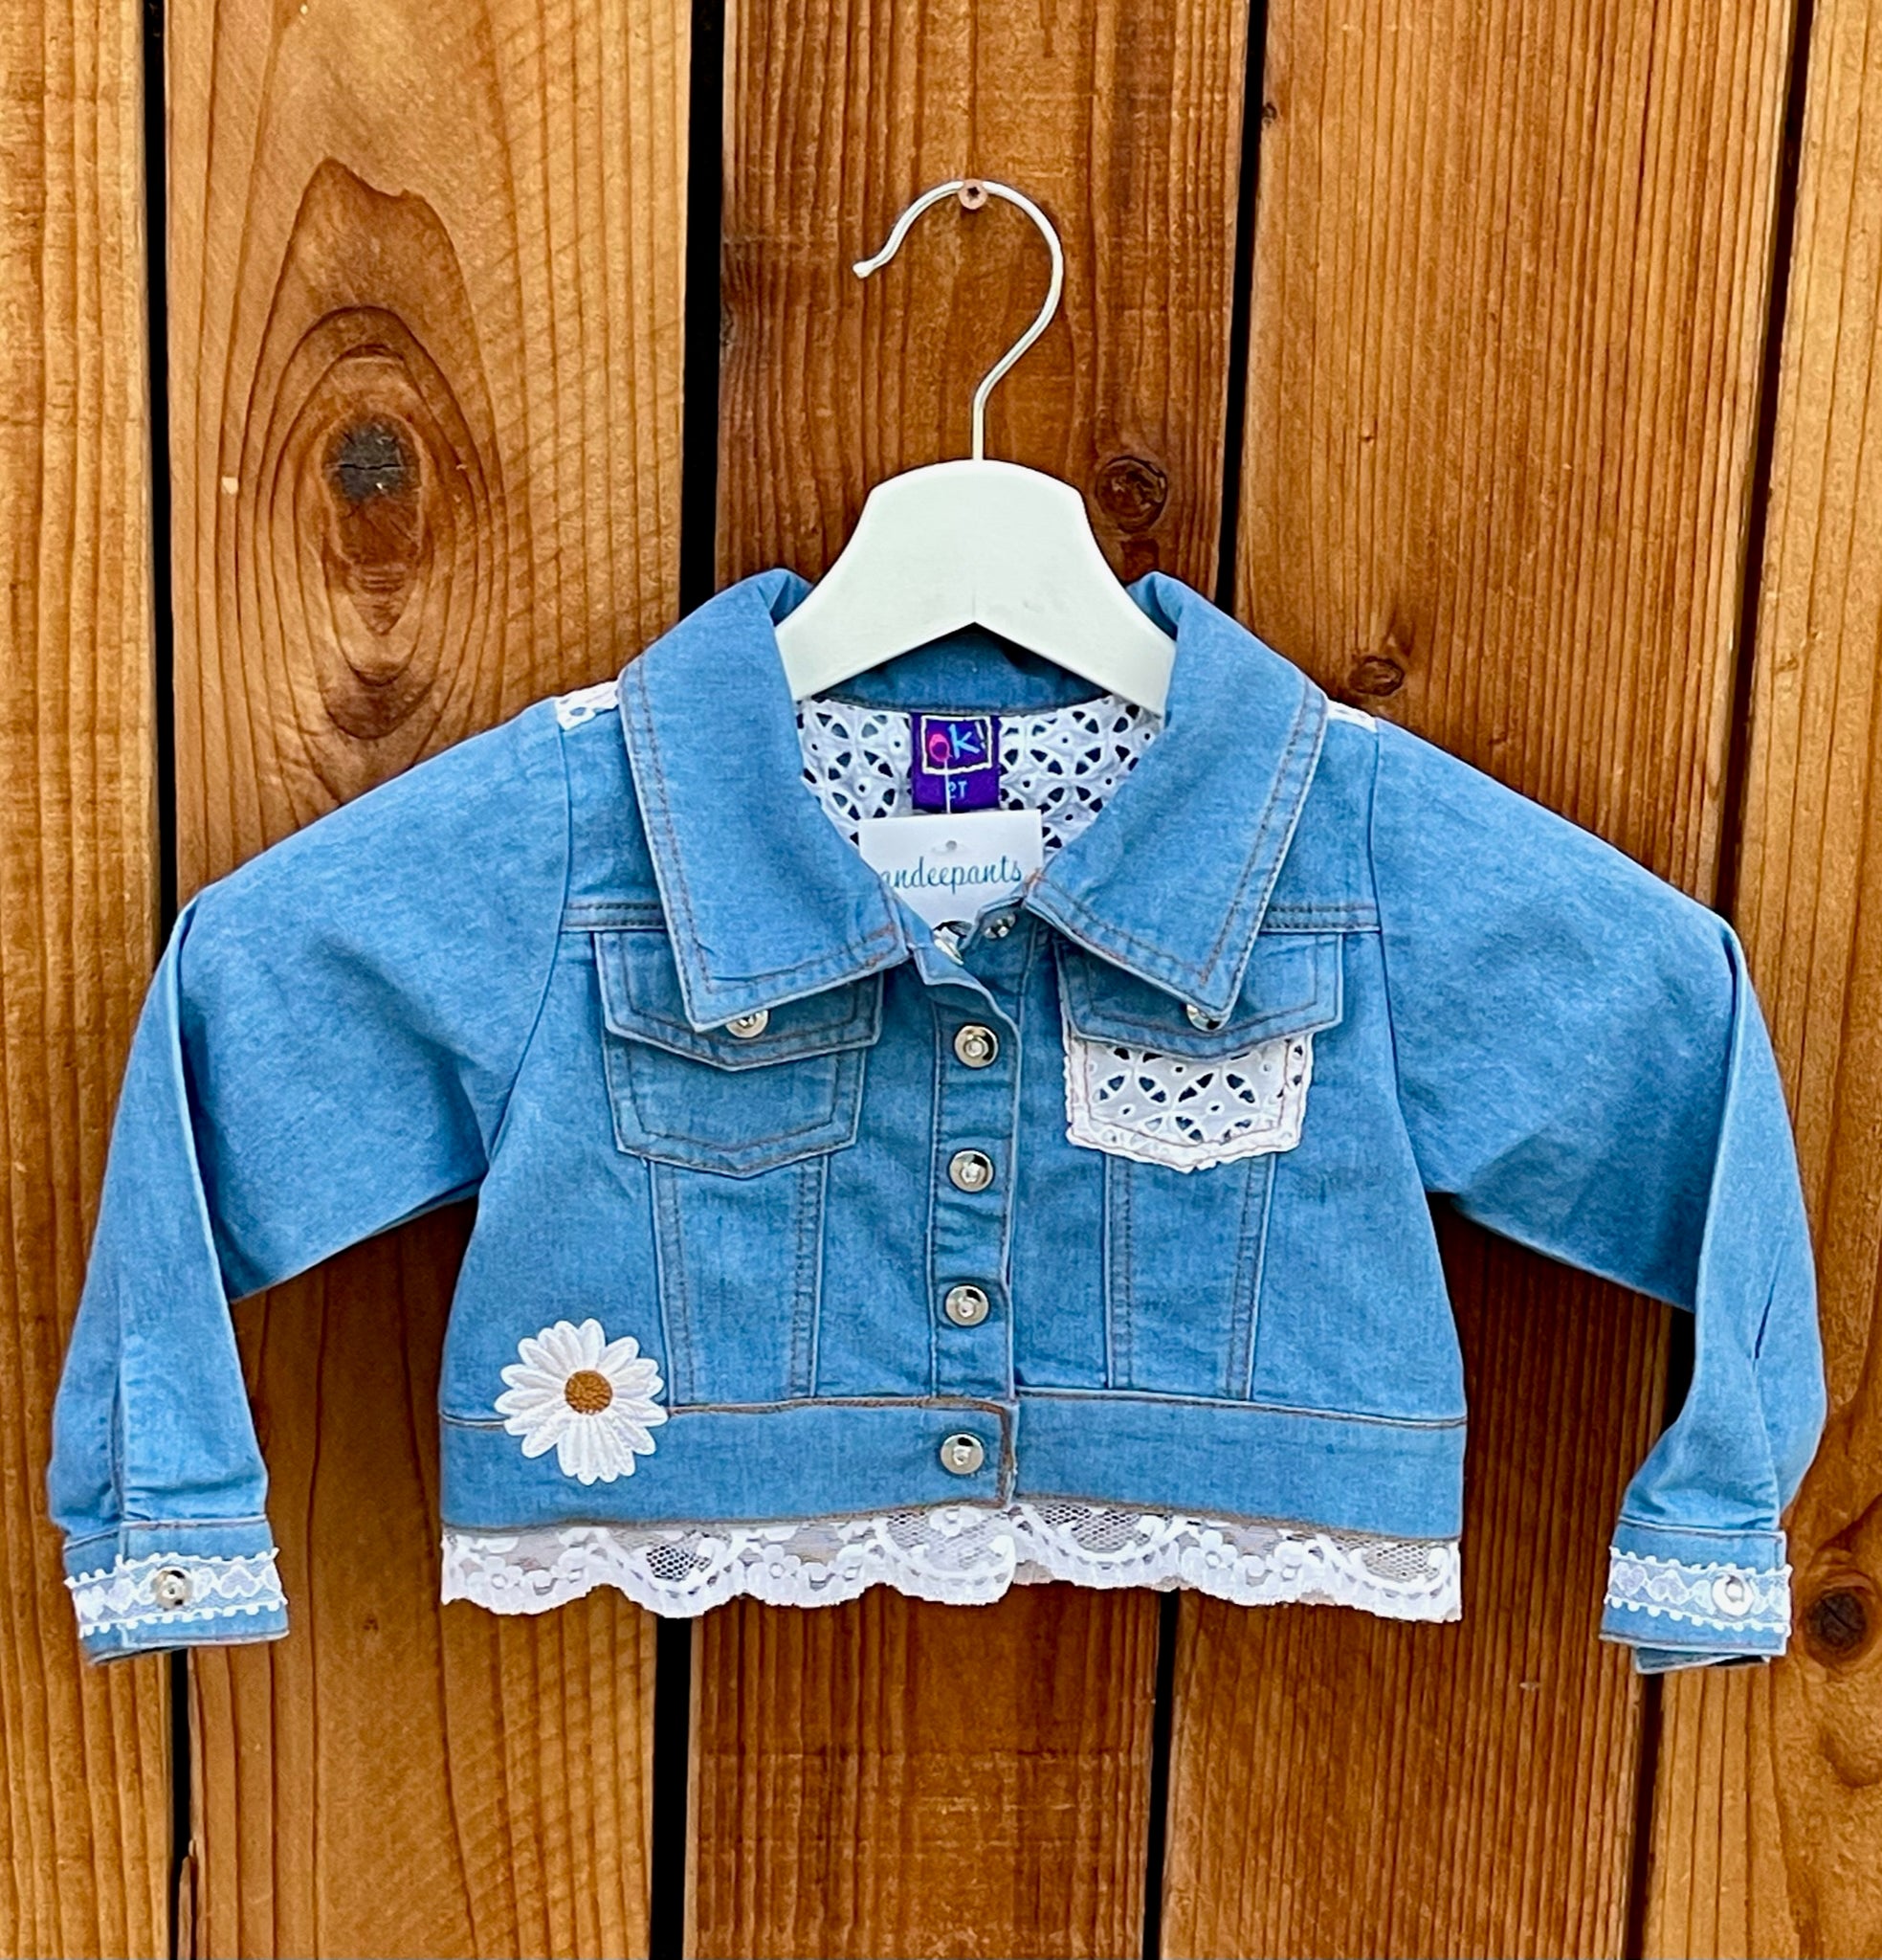 Girls jacket light blue with white lace 2T